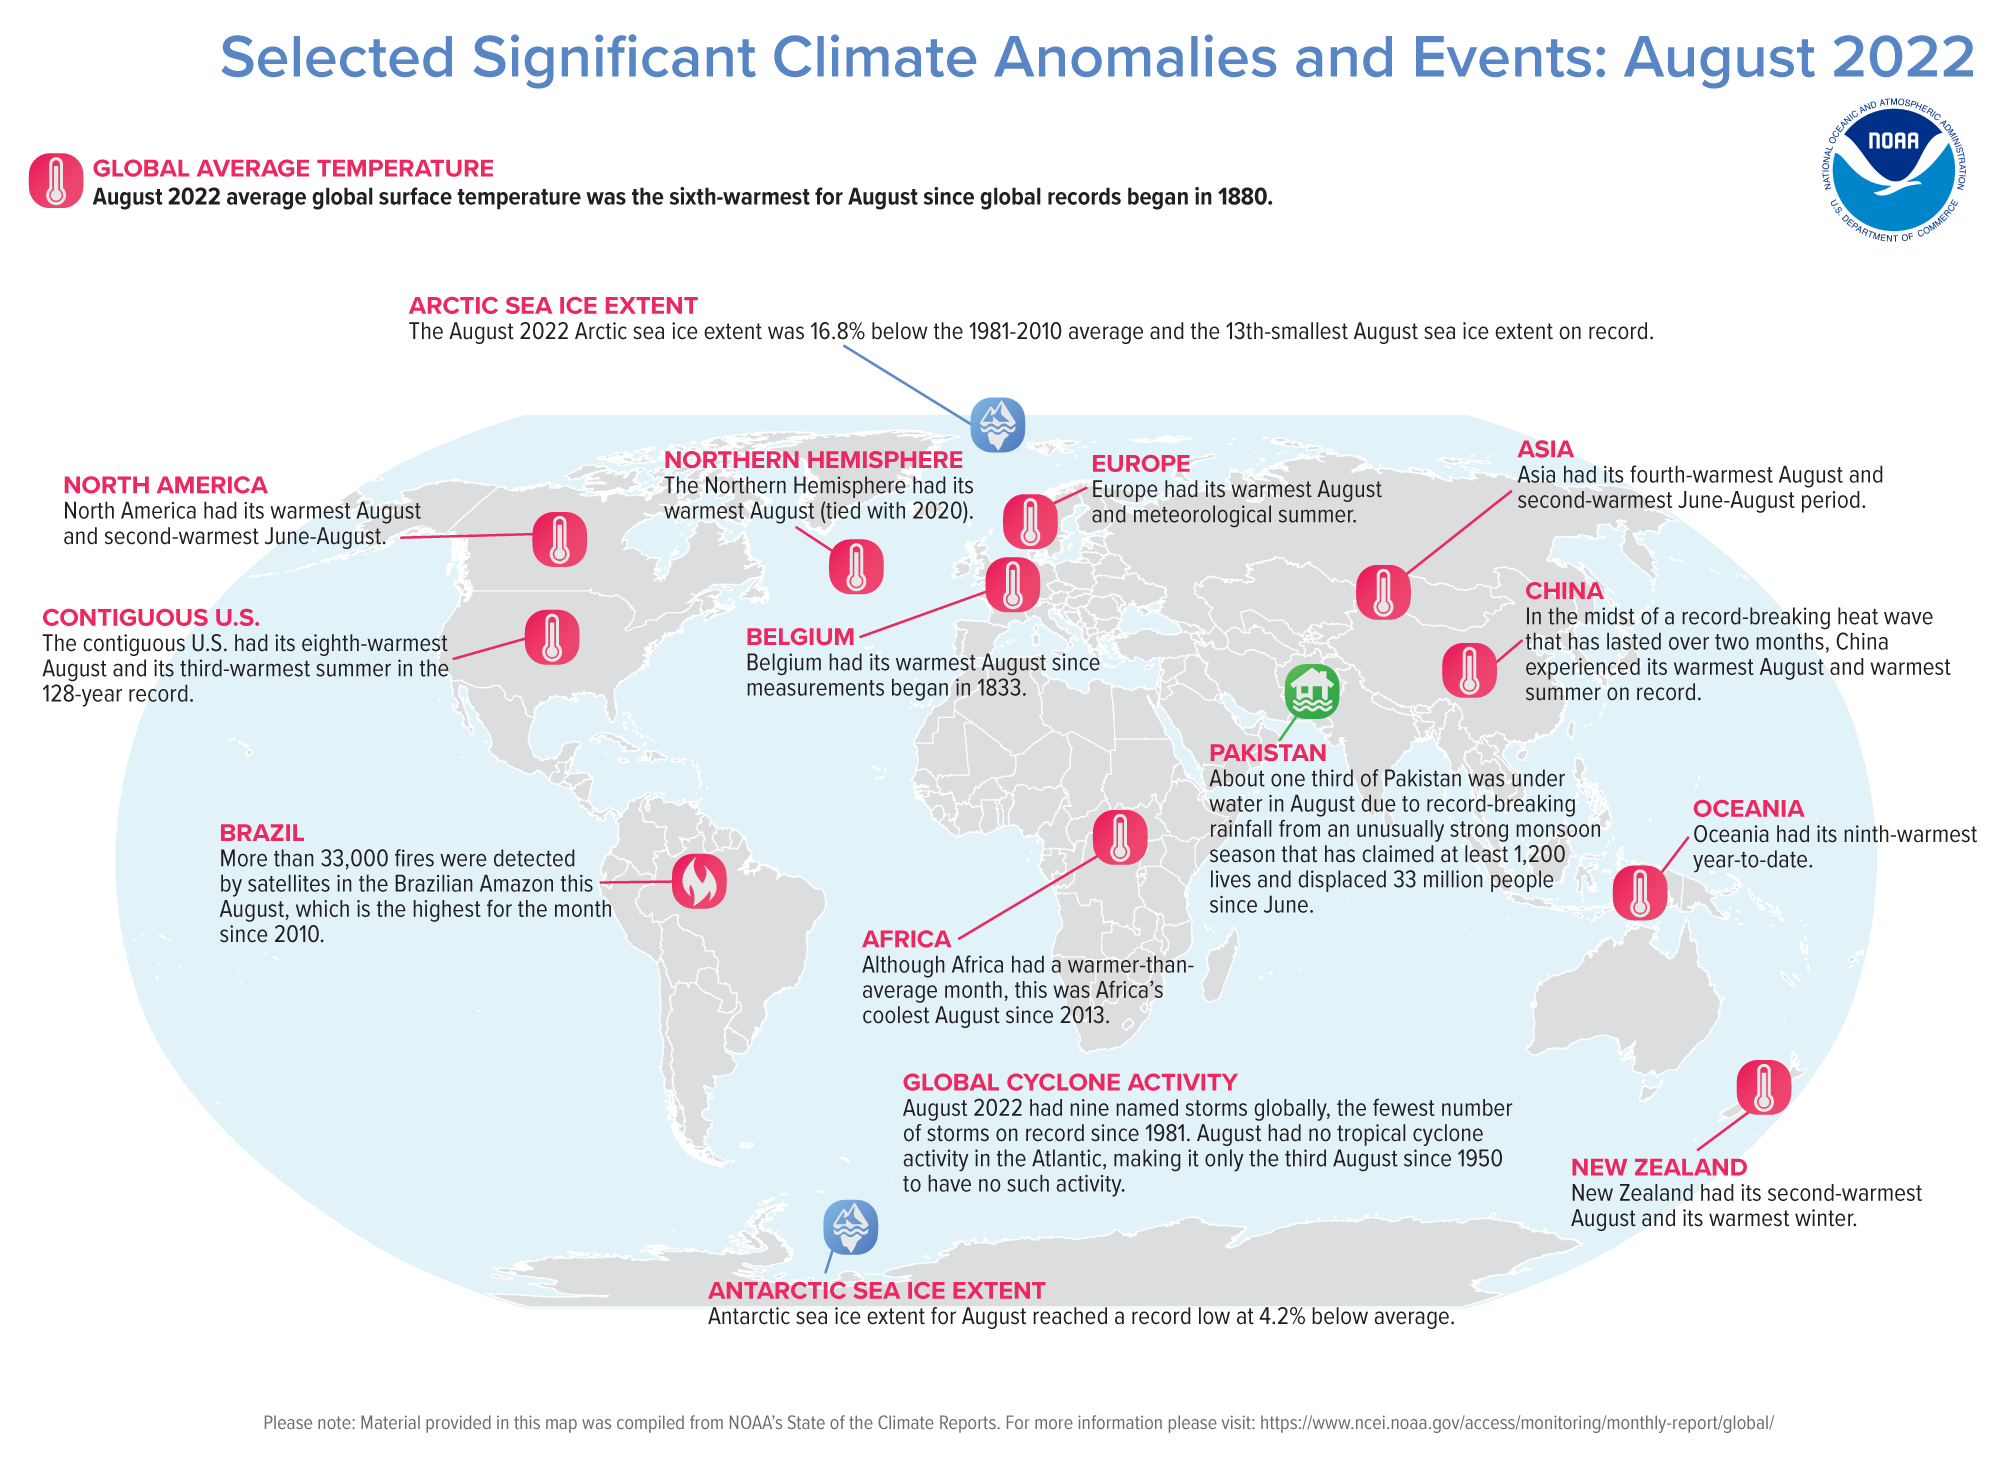  map of the world plotted with some of the most significant climate events that occurred during August 2022. 